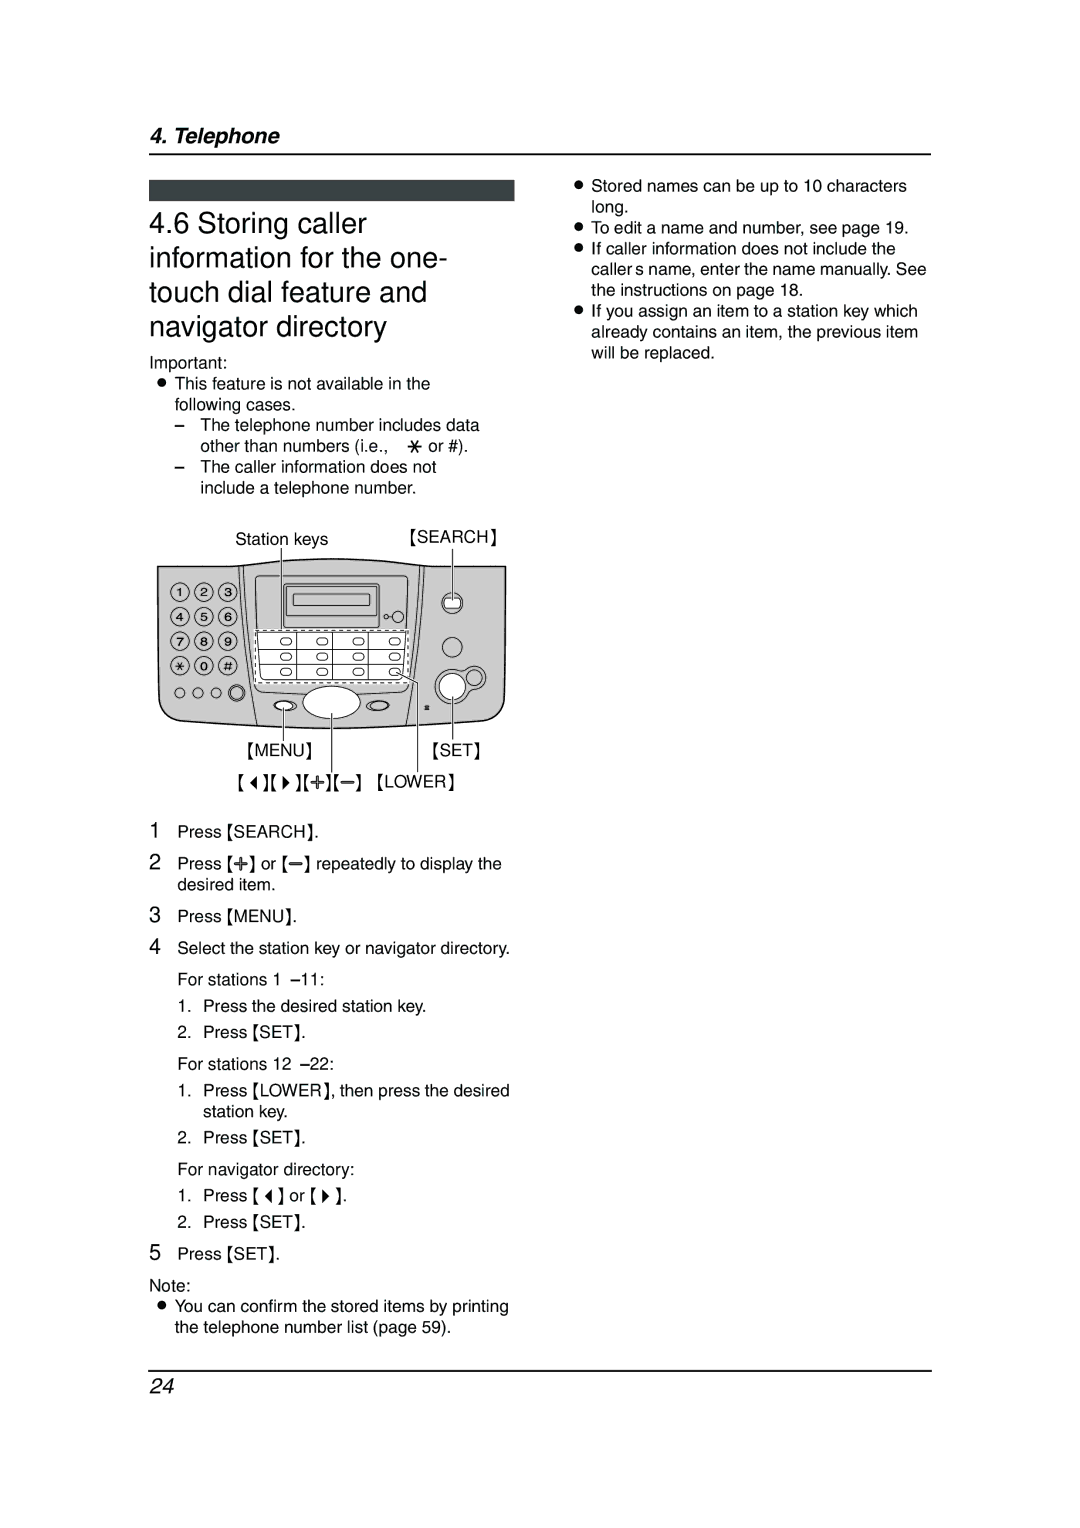 Panasonic KX-FT901BX manual This feature is not available in the following cases, Menu SET, For navigator directory 